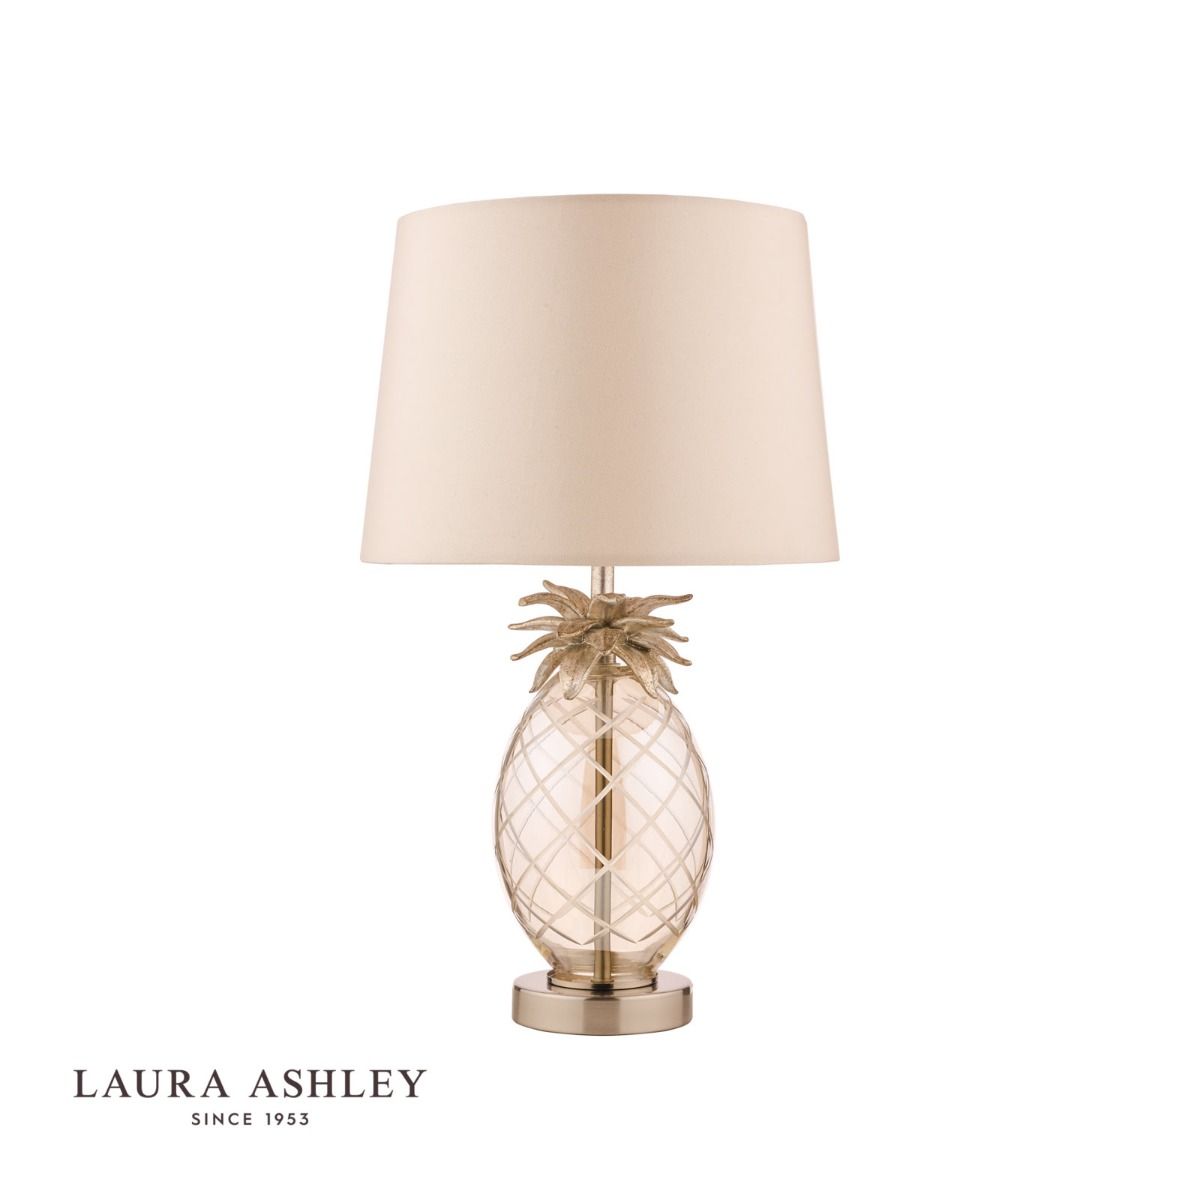 Laura Ashley Pineapple Cut Glass 1, Lamp On The Table Image